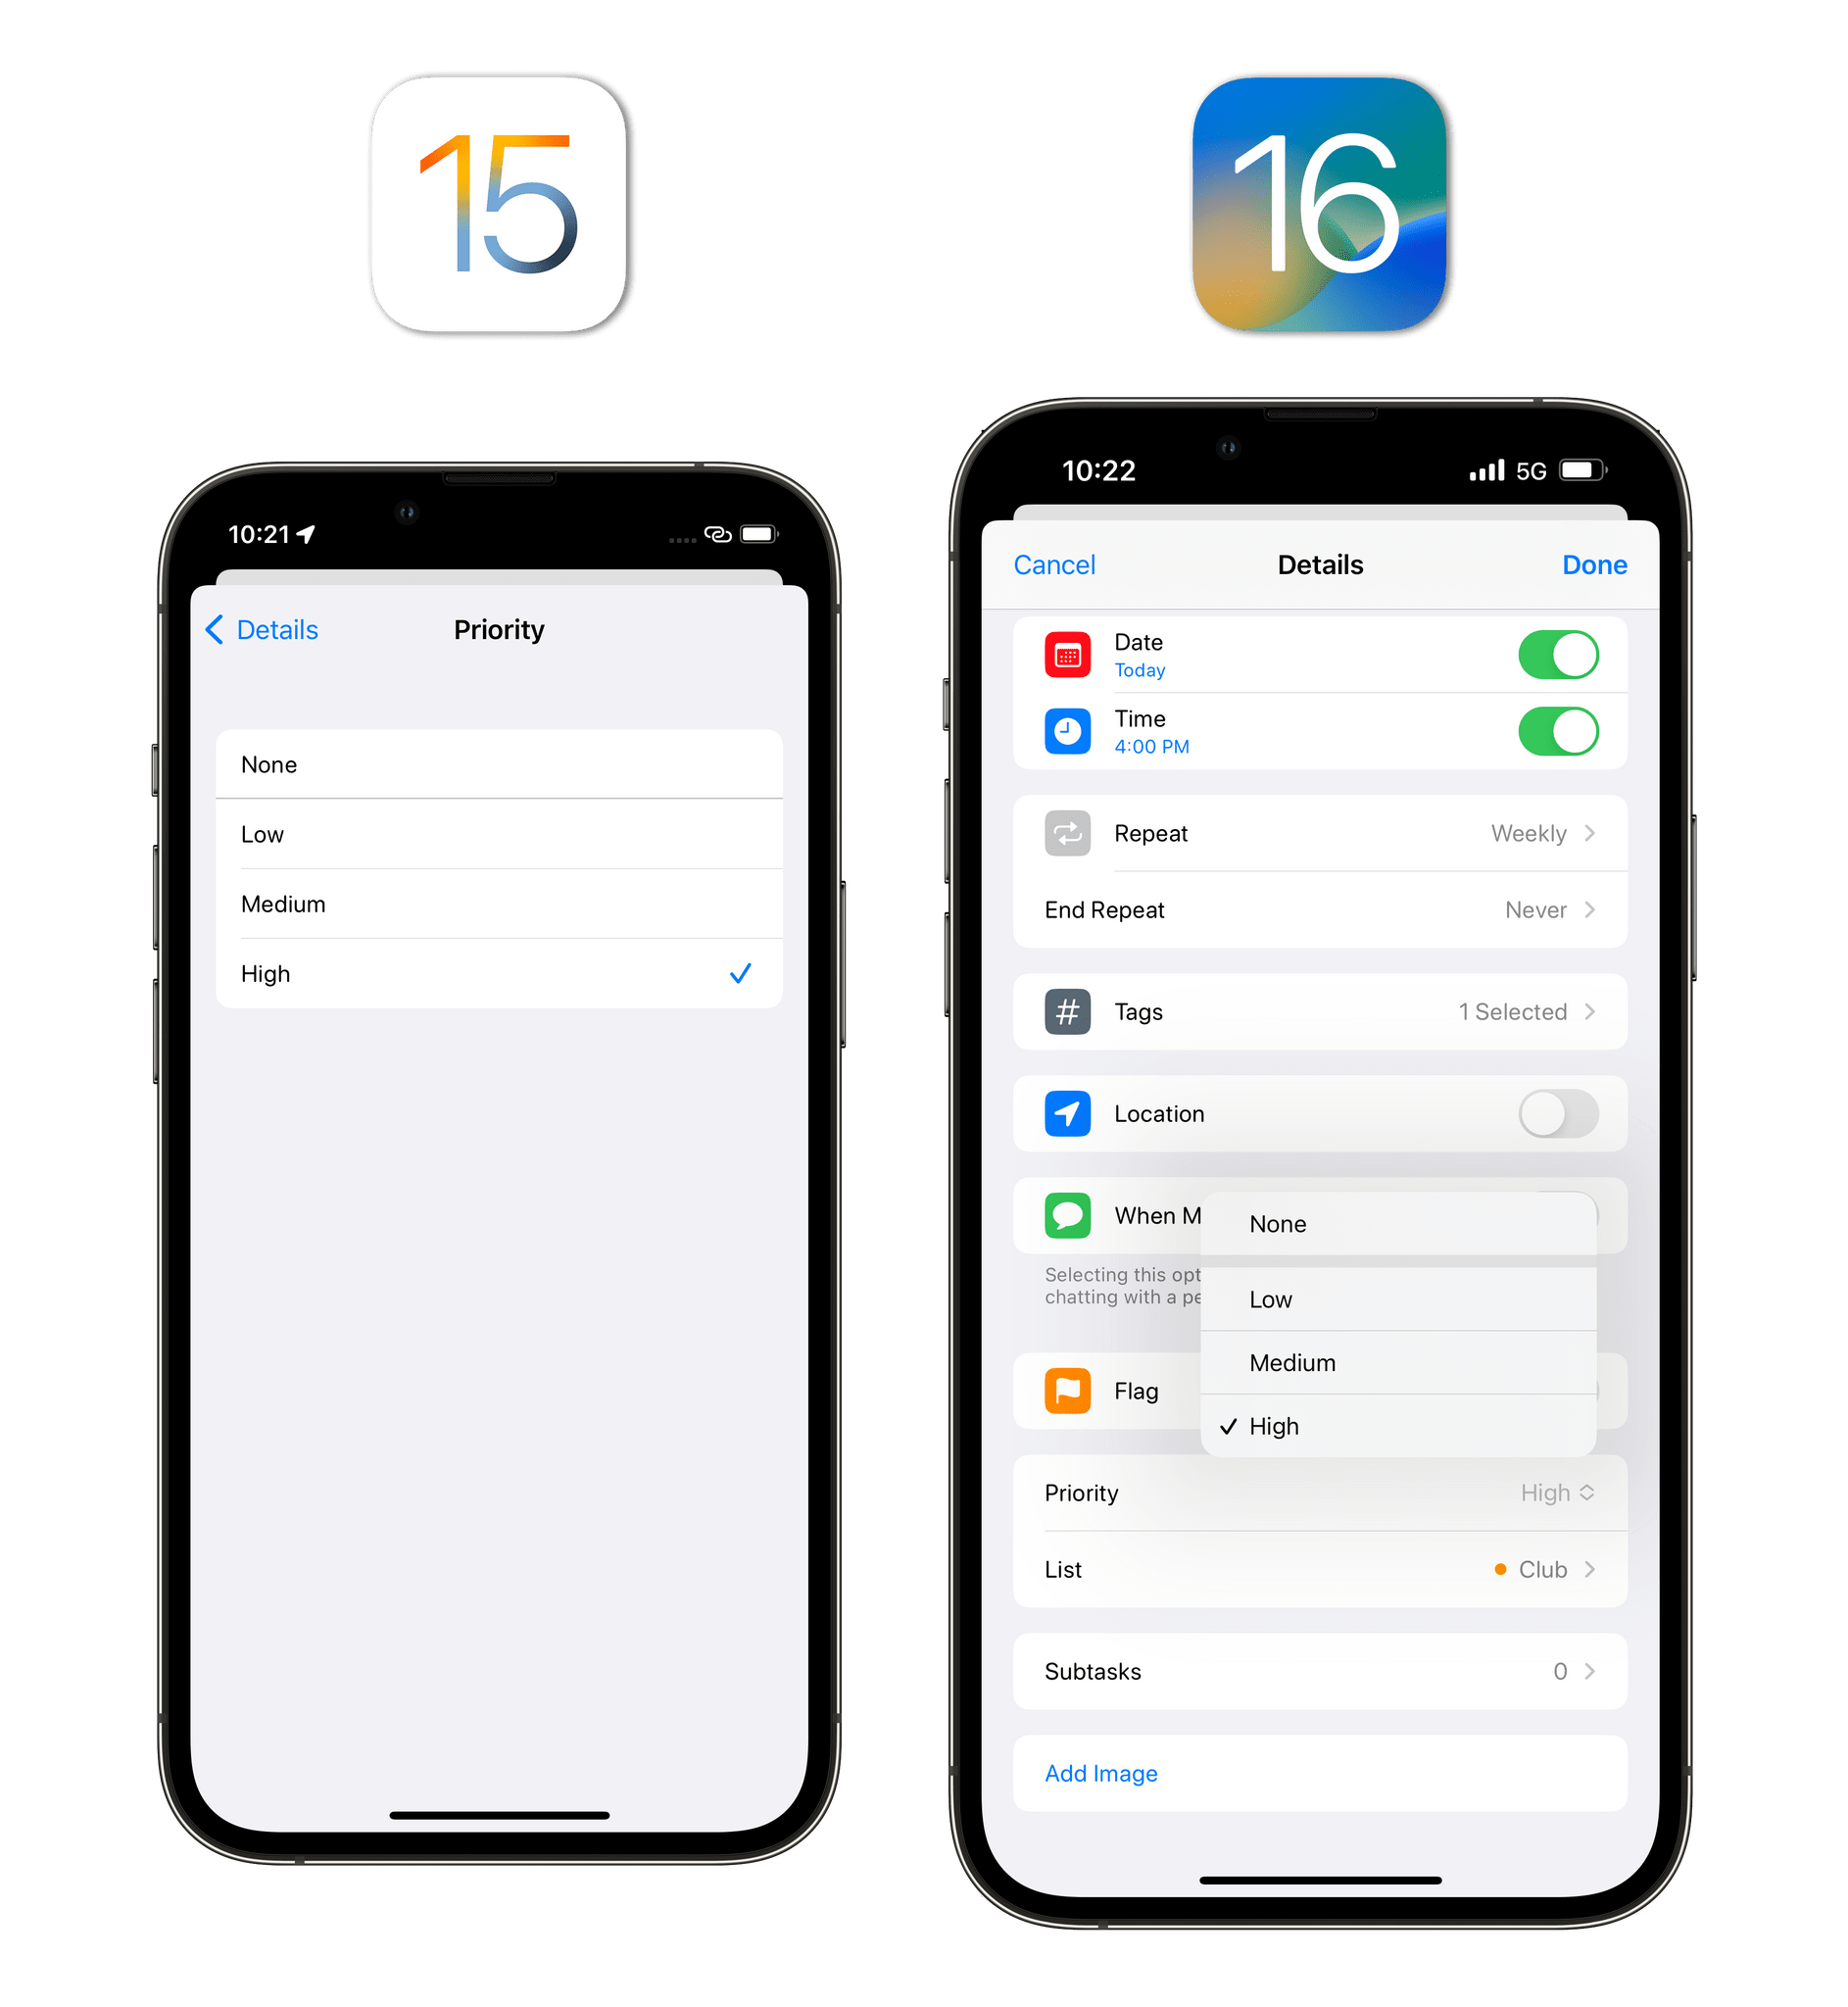 In iOS 16, pull-down menus are used in more places, which makes navigation in apps faster as you're navigating into fewer nested pages.